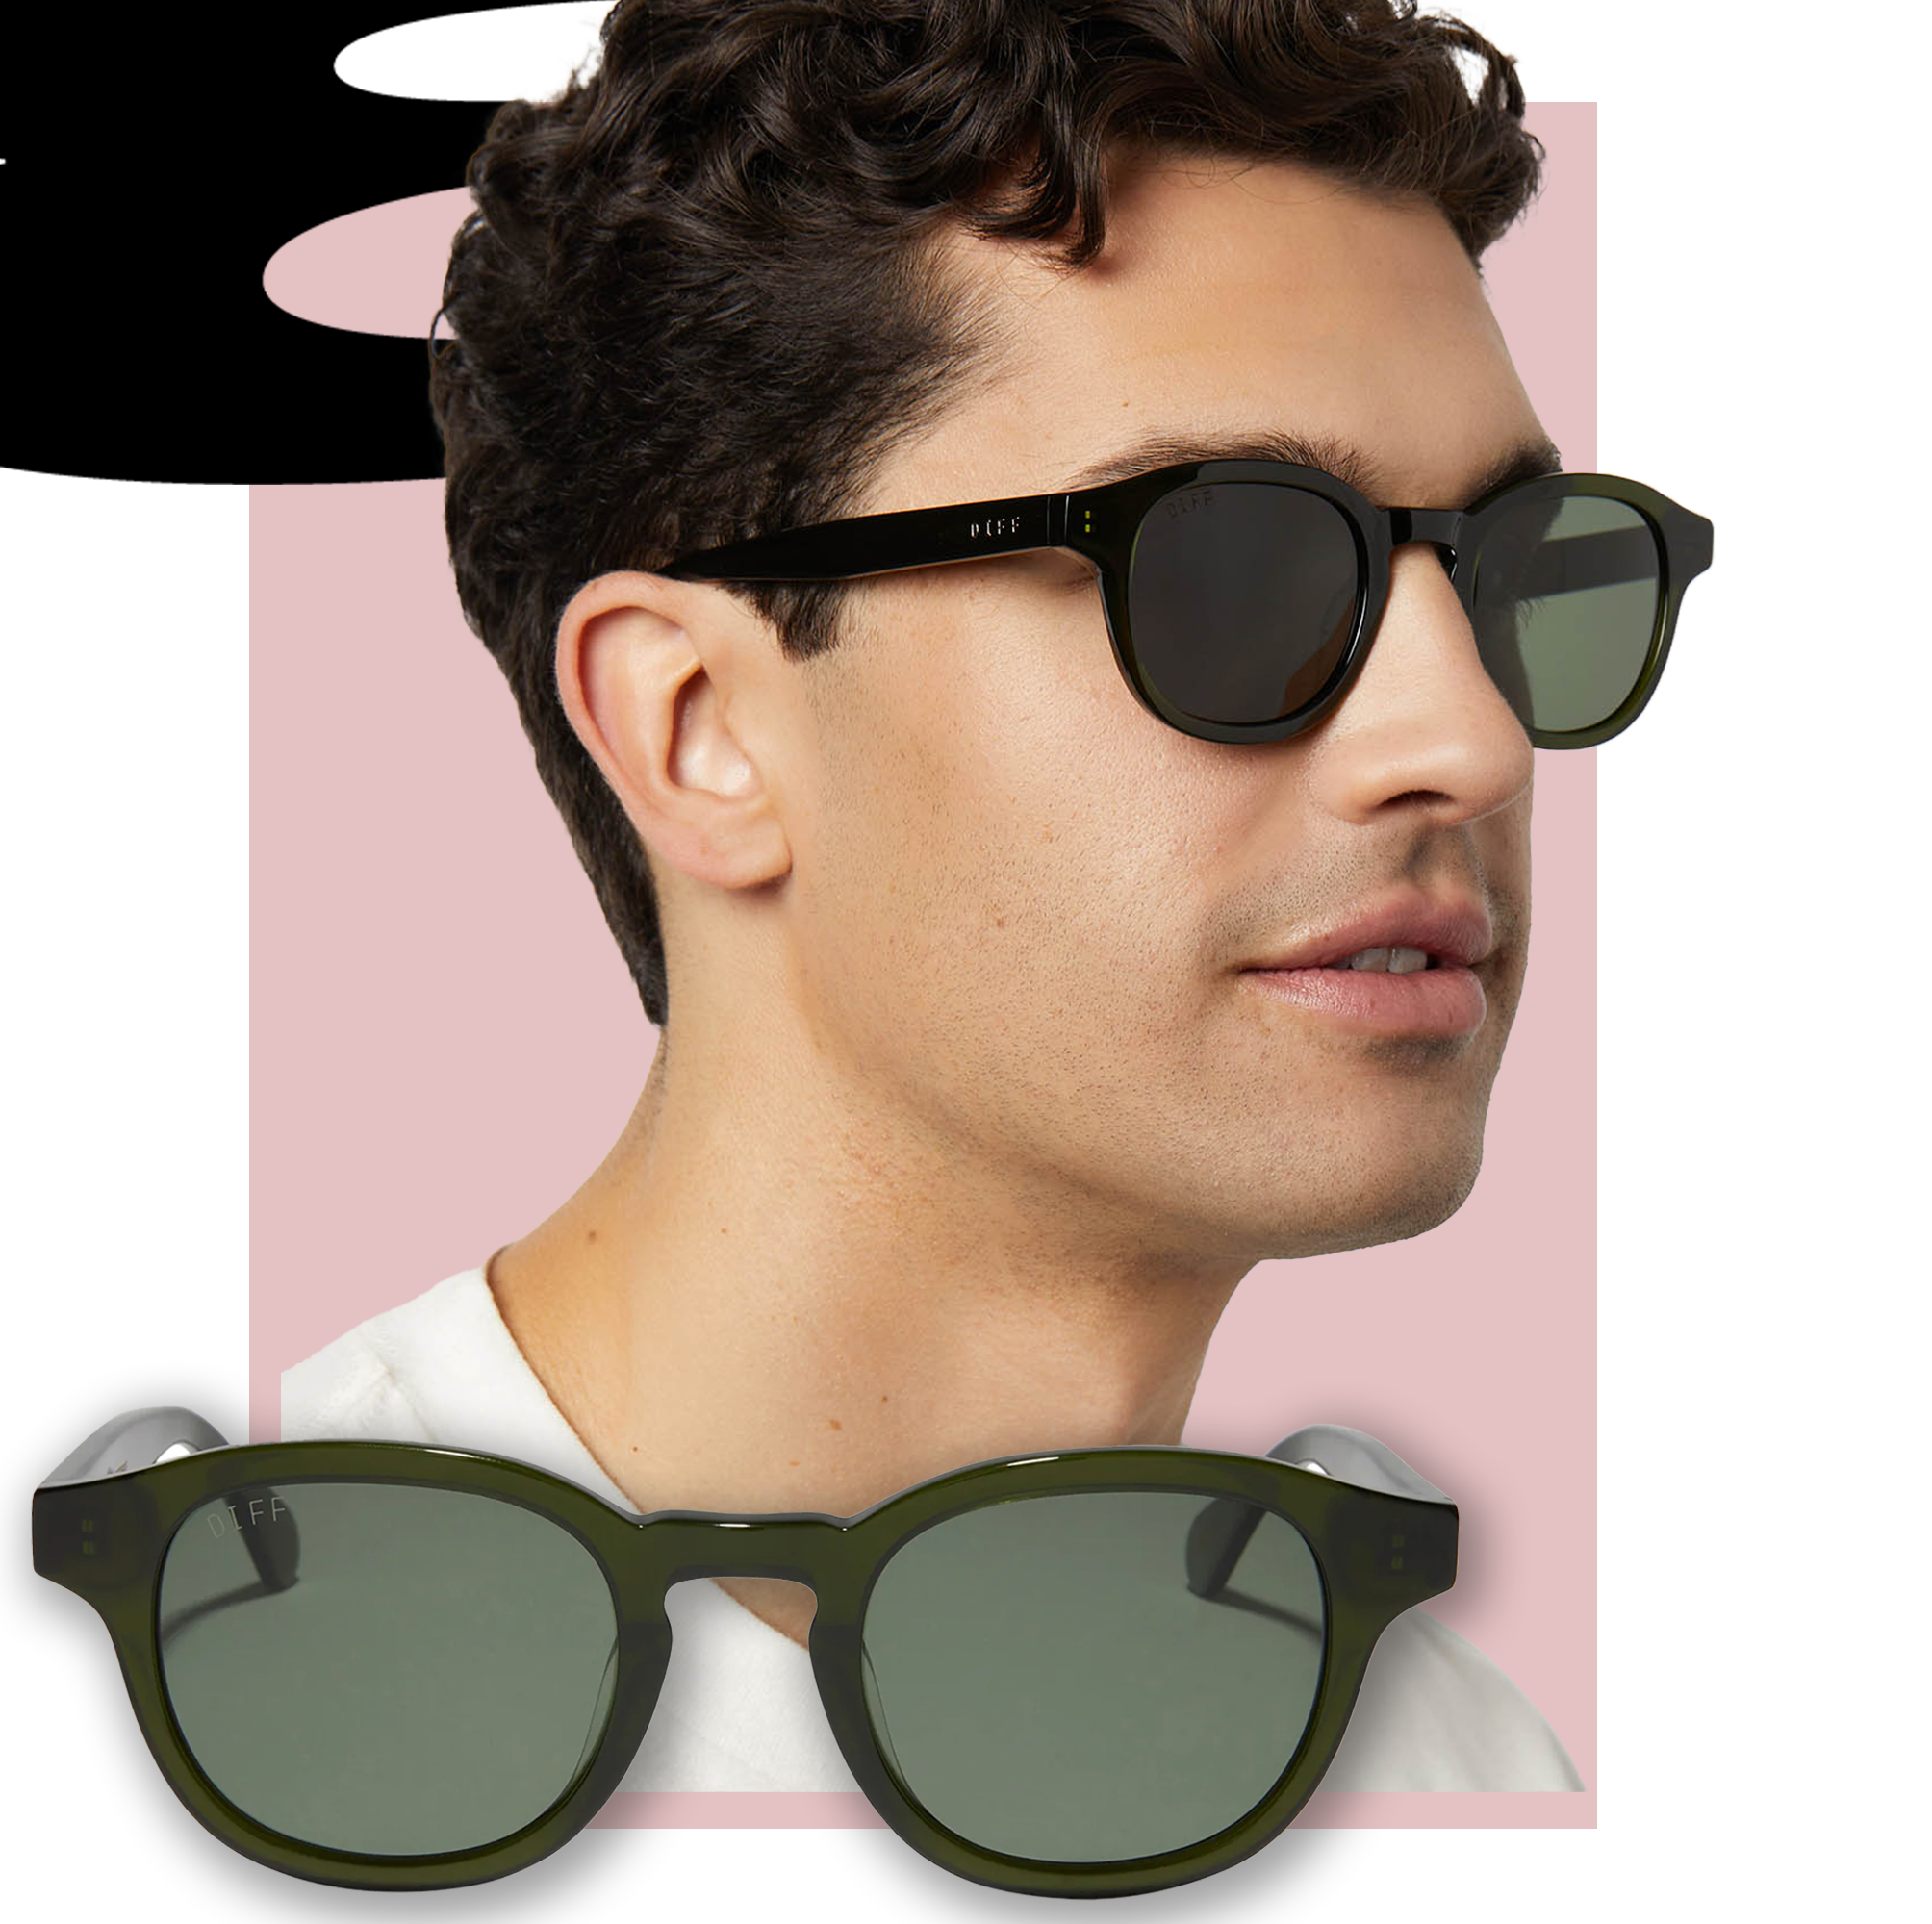 The 16 Best Polarized Sunglasses That Are Fashionable and Functional